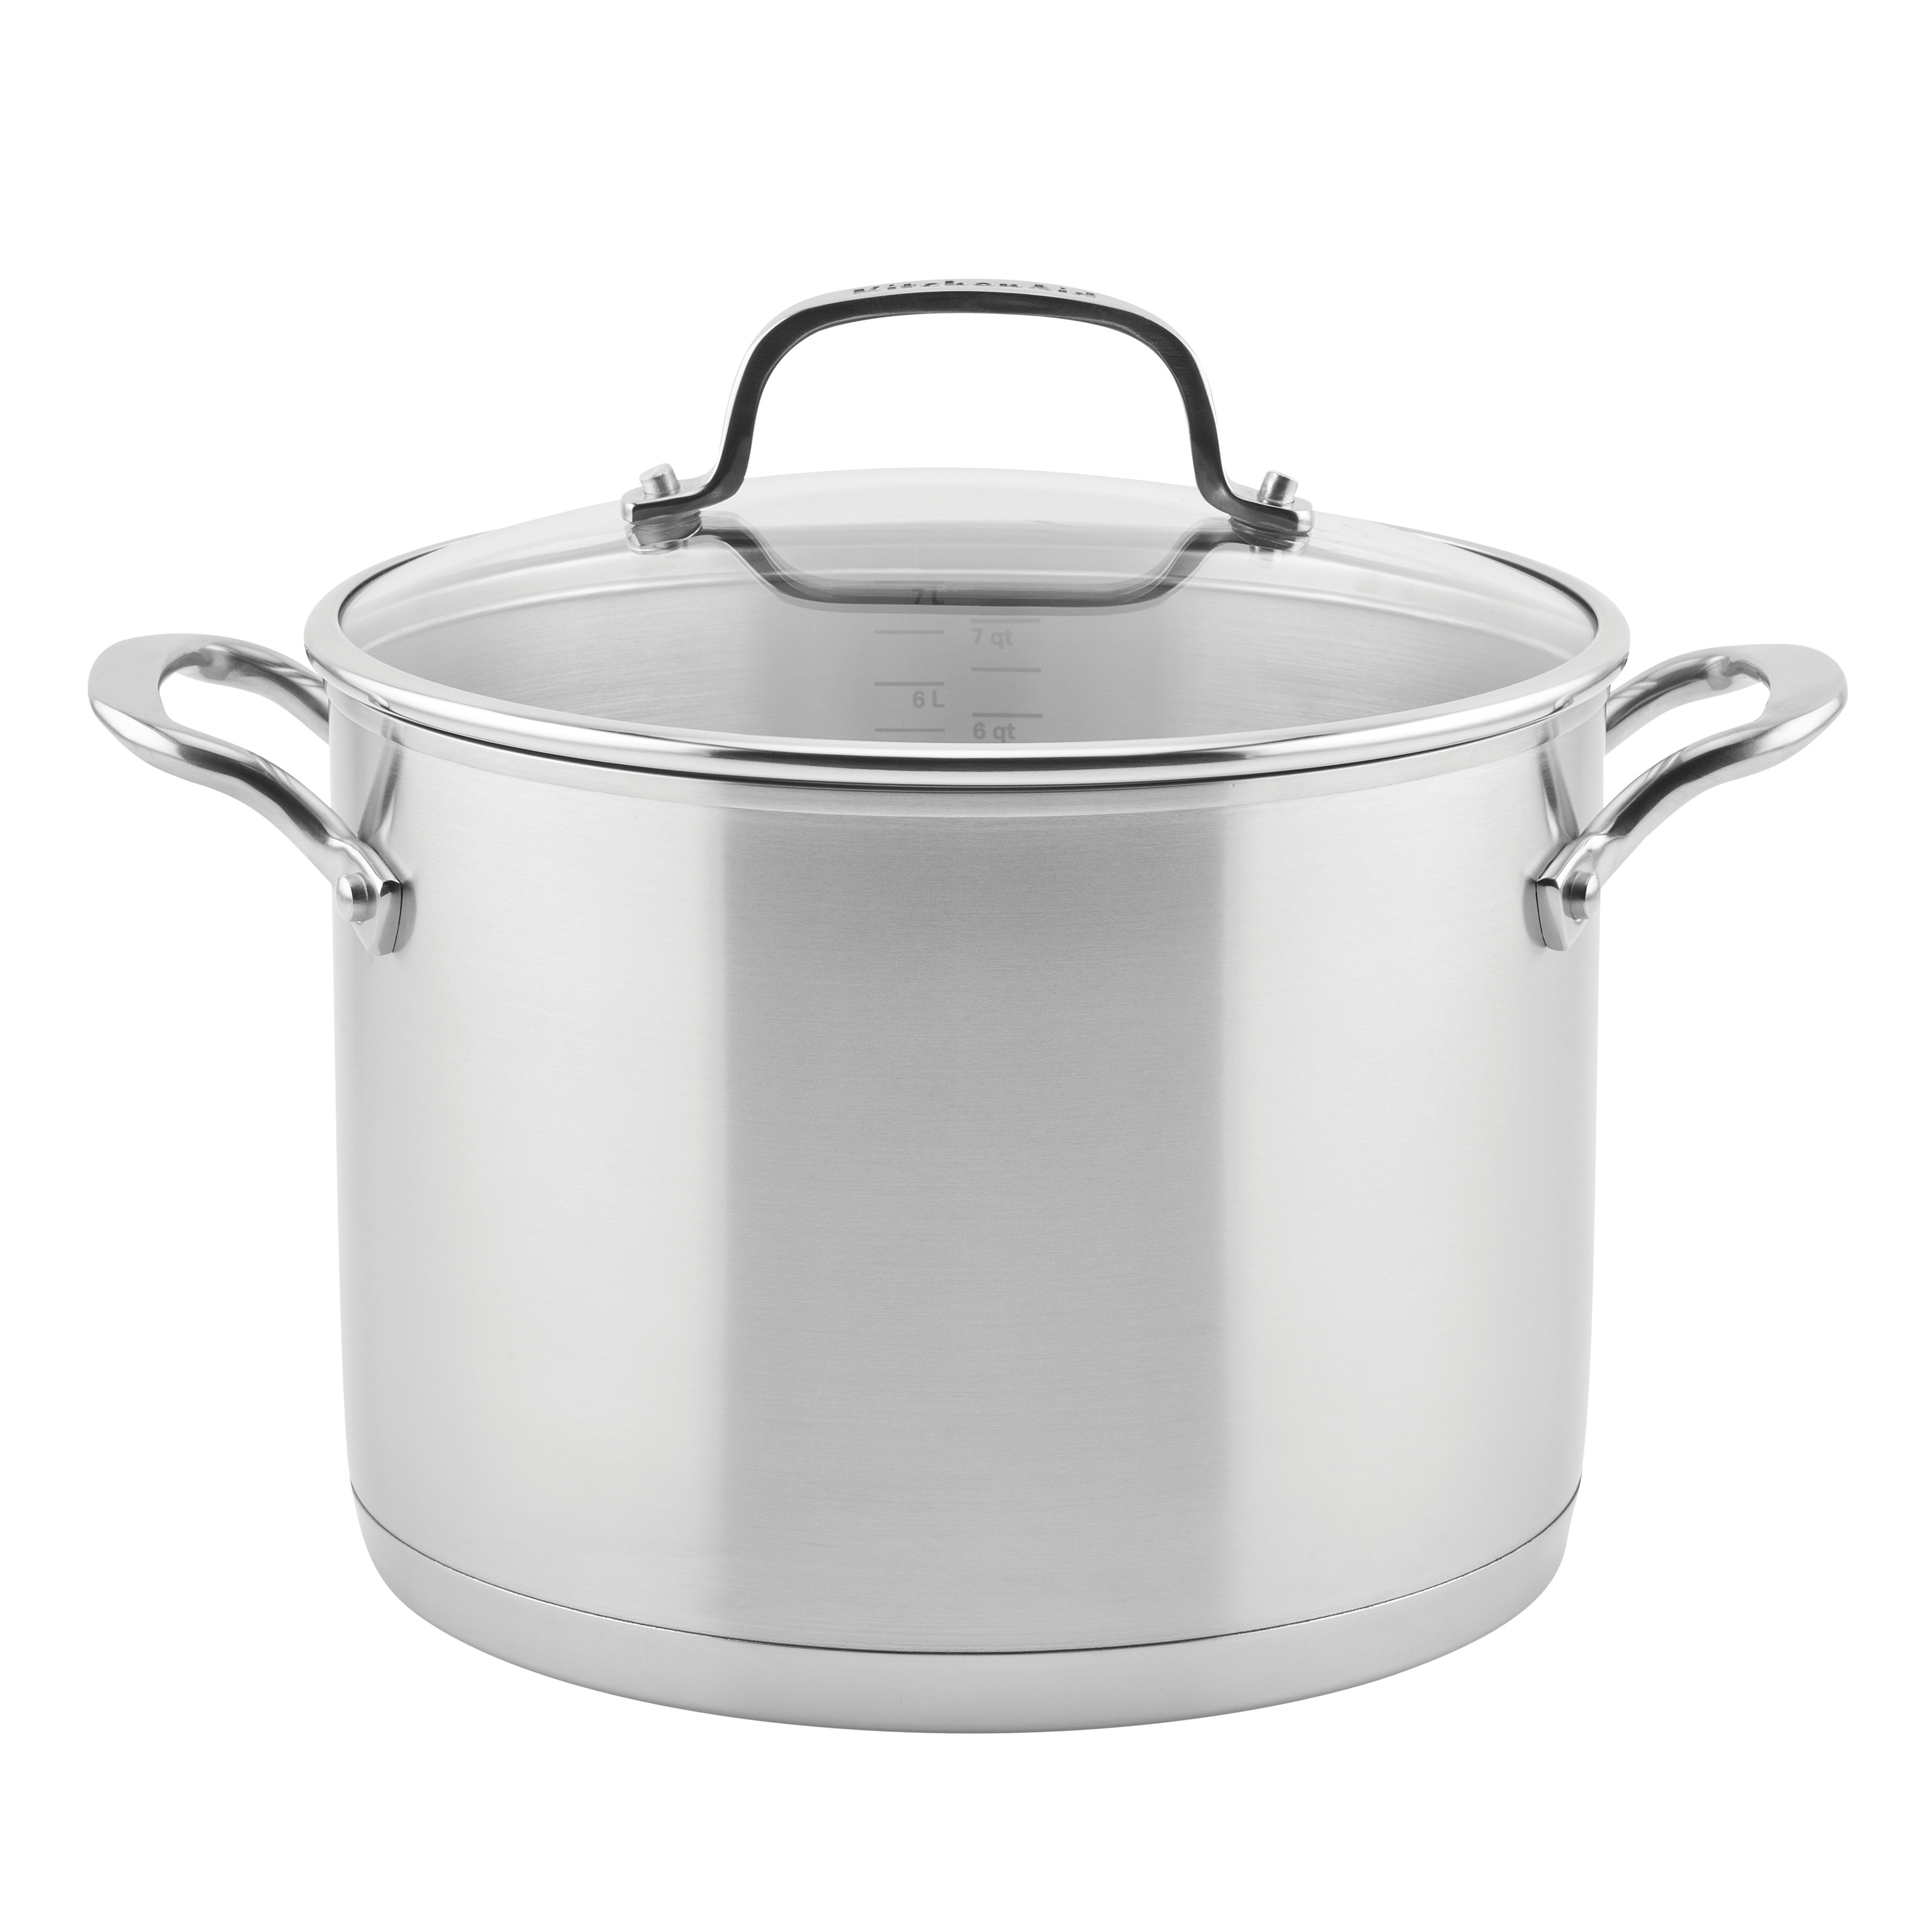 Stainless Steel Stock Pot, 6 QT